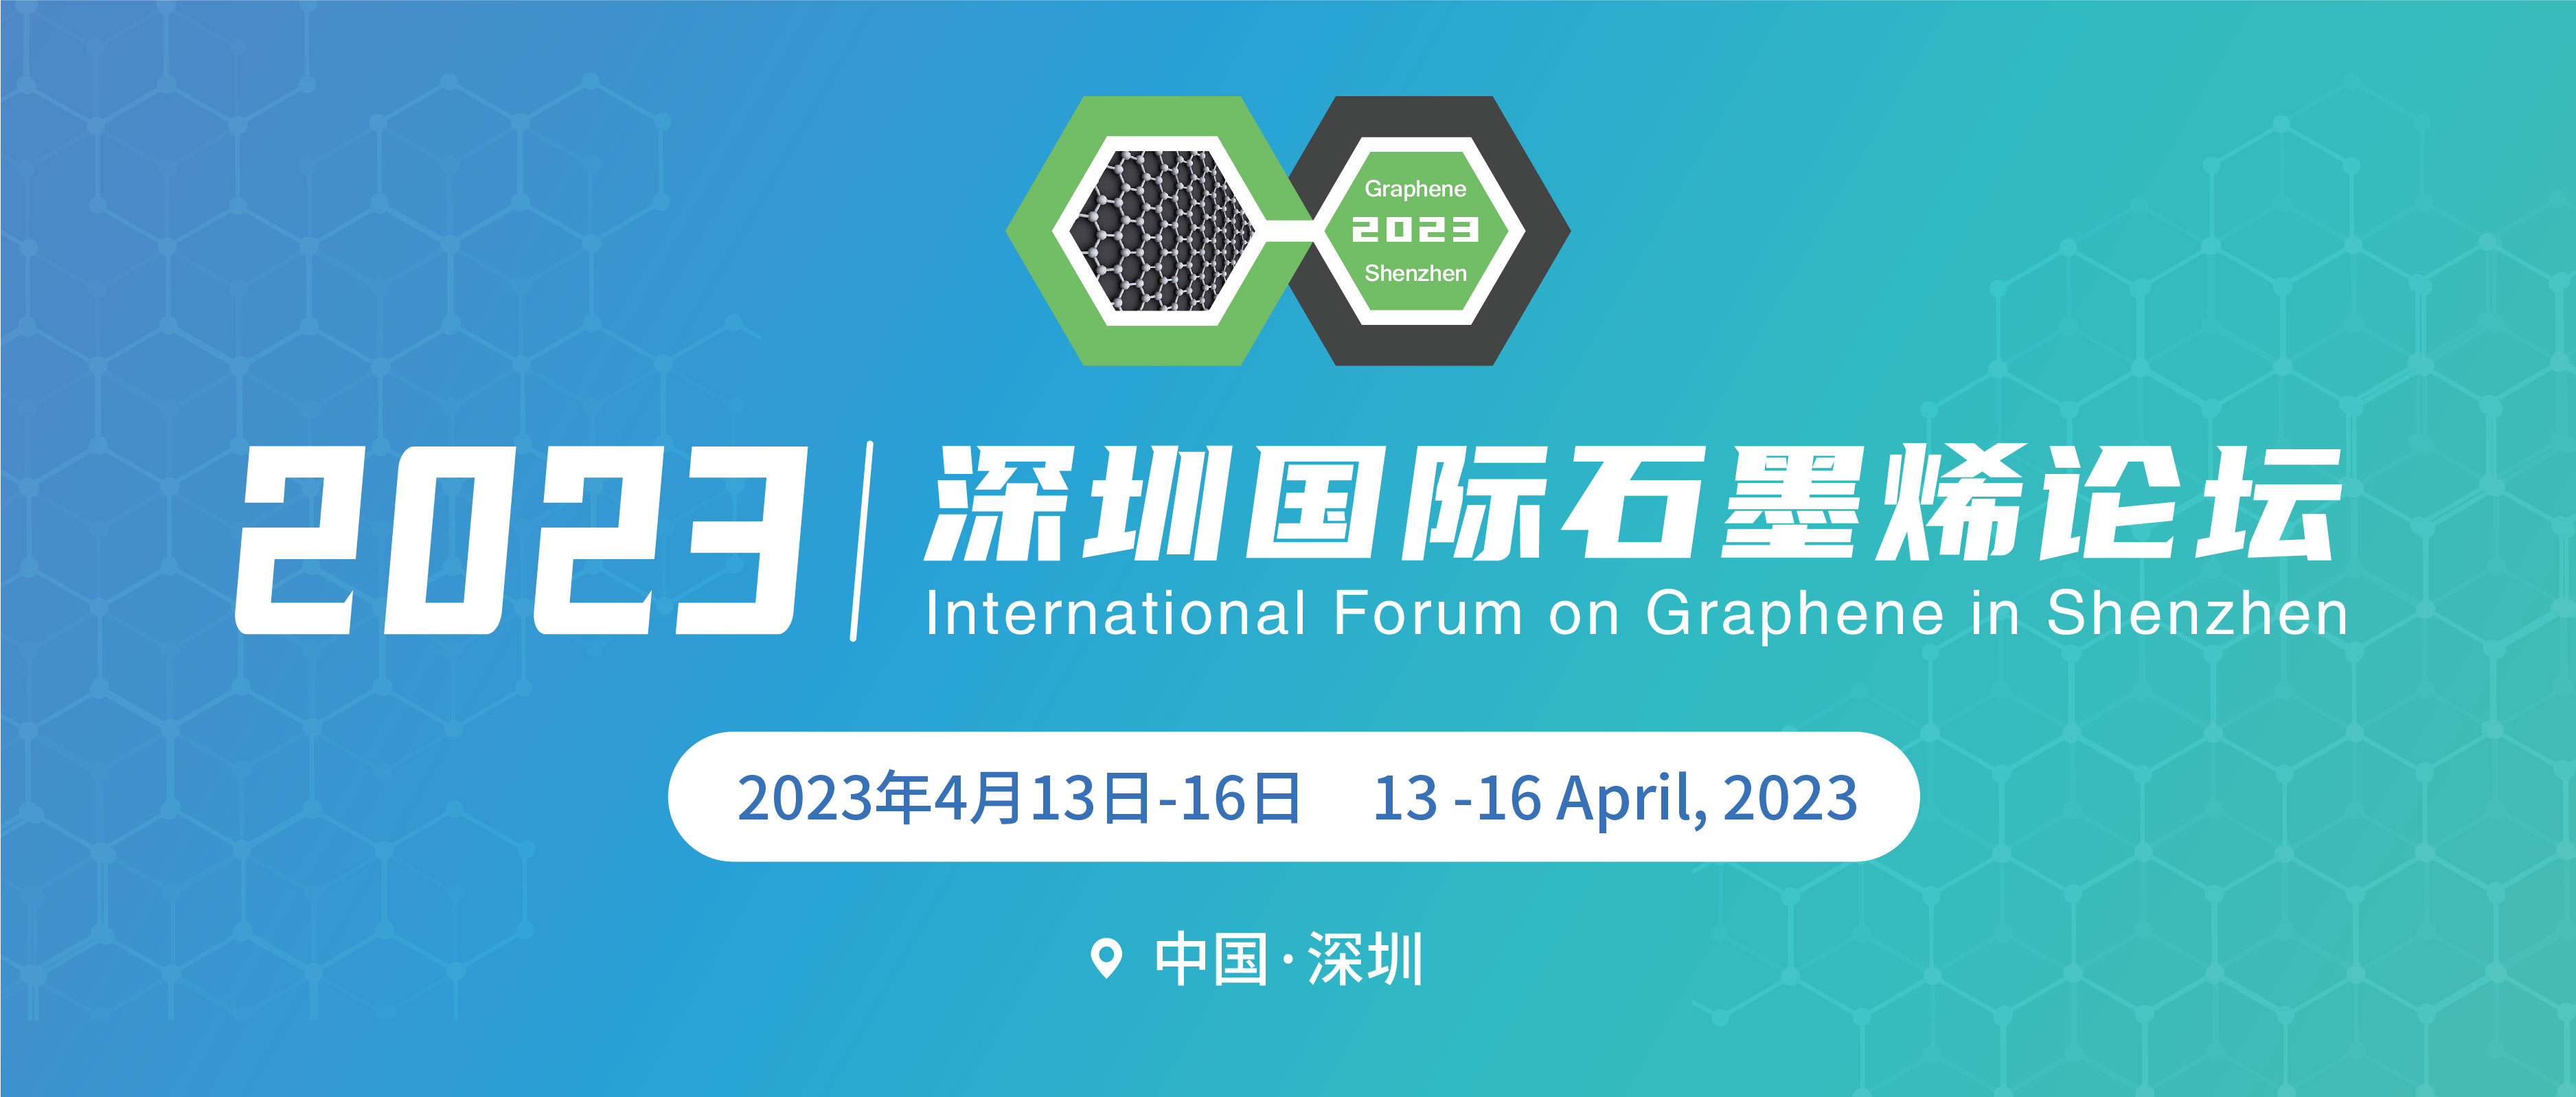 2023 The 10th Shenzhen International Graphene Forum and the 4th International Symposium on Energy Storage Materials successfully concluded in Shenzhen